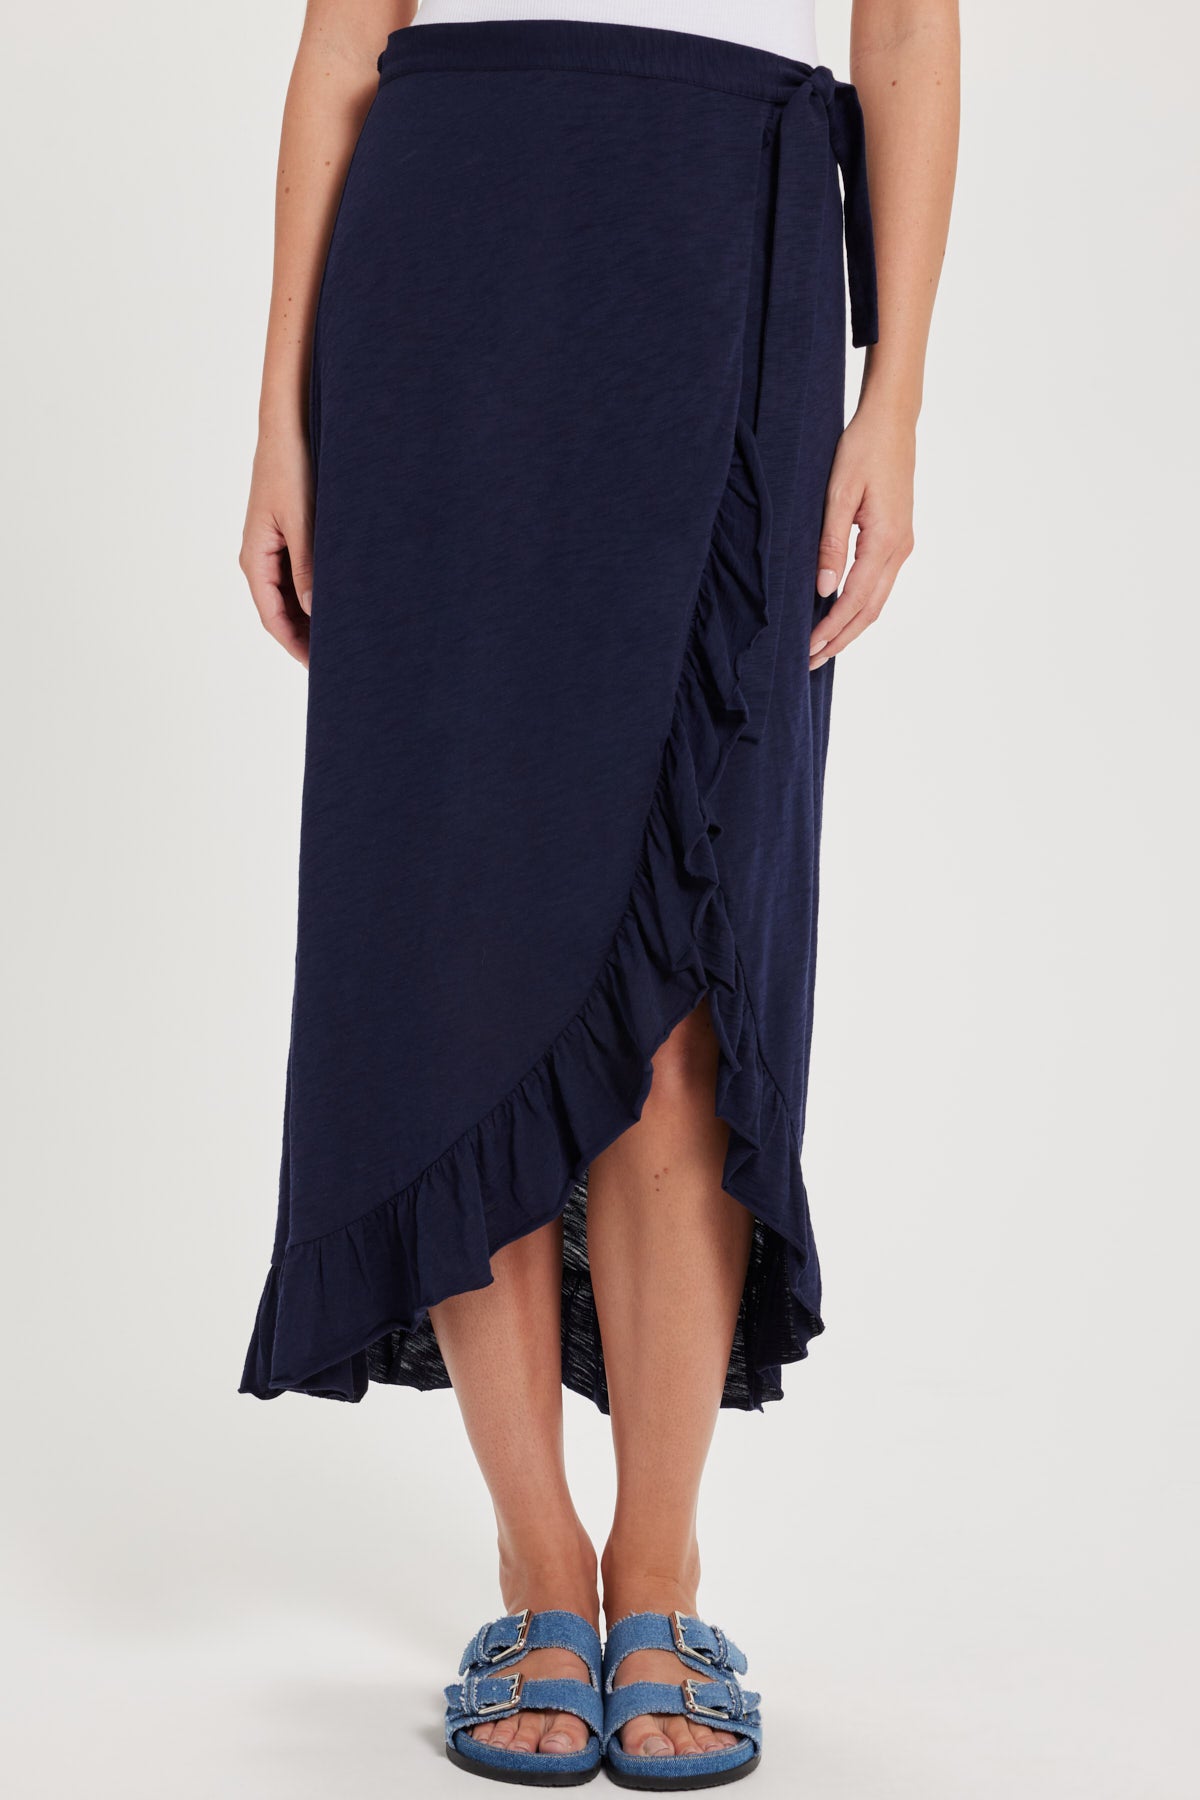 Amore Wrap Skirt - Goldie LeWinter